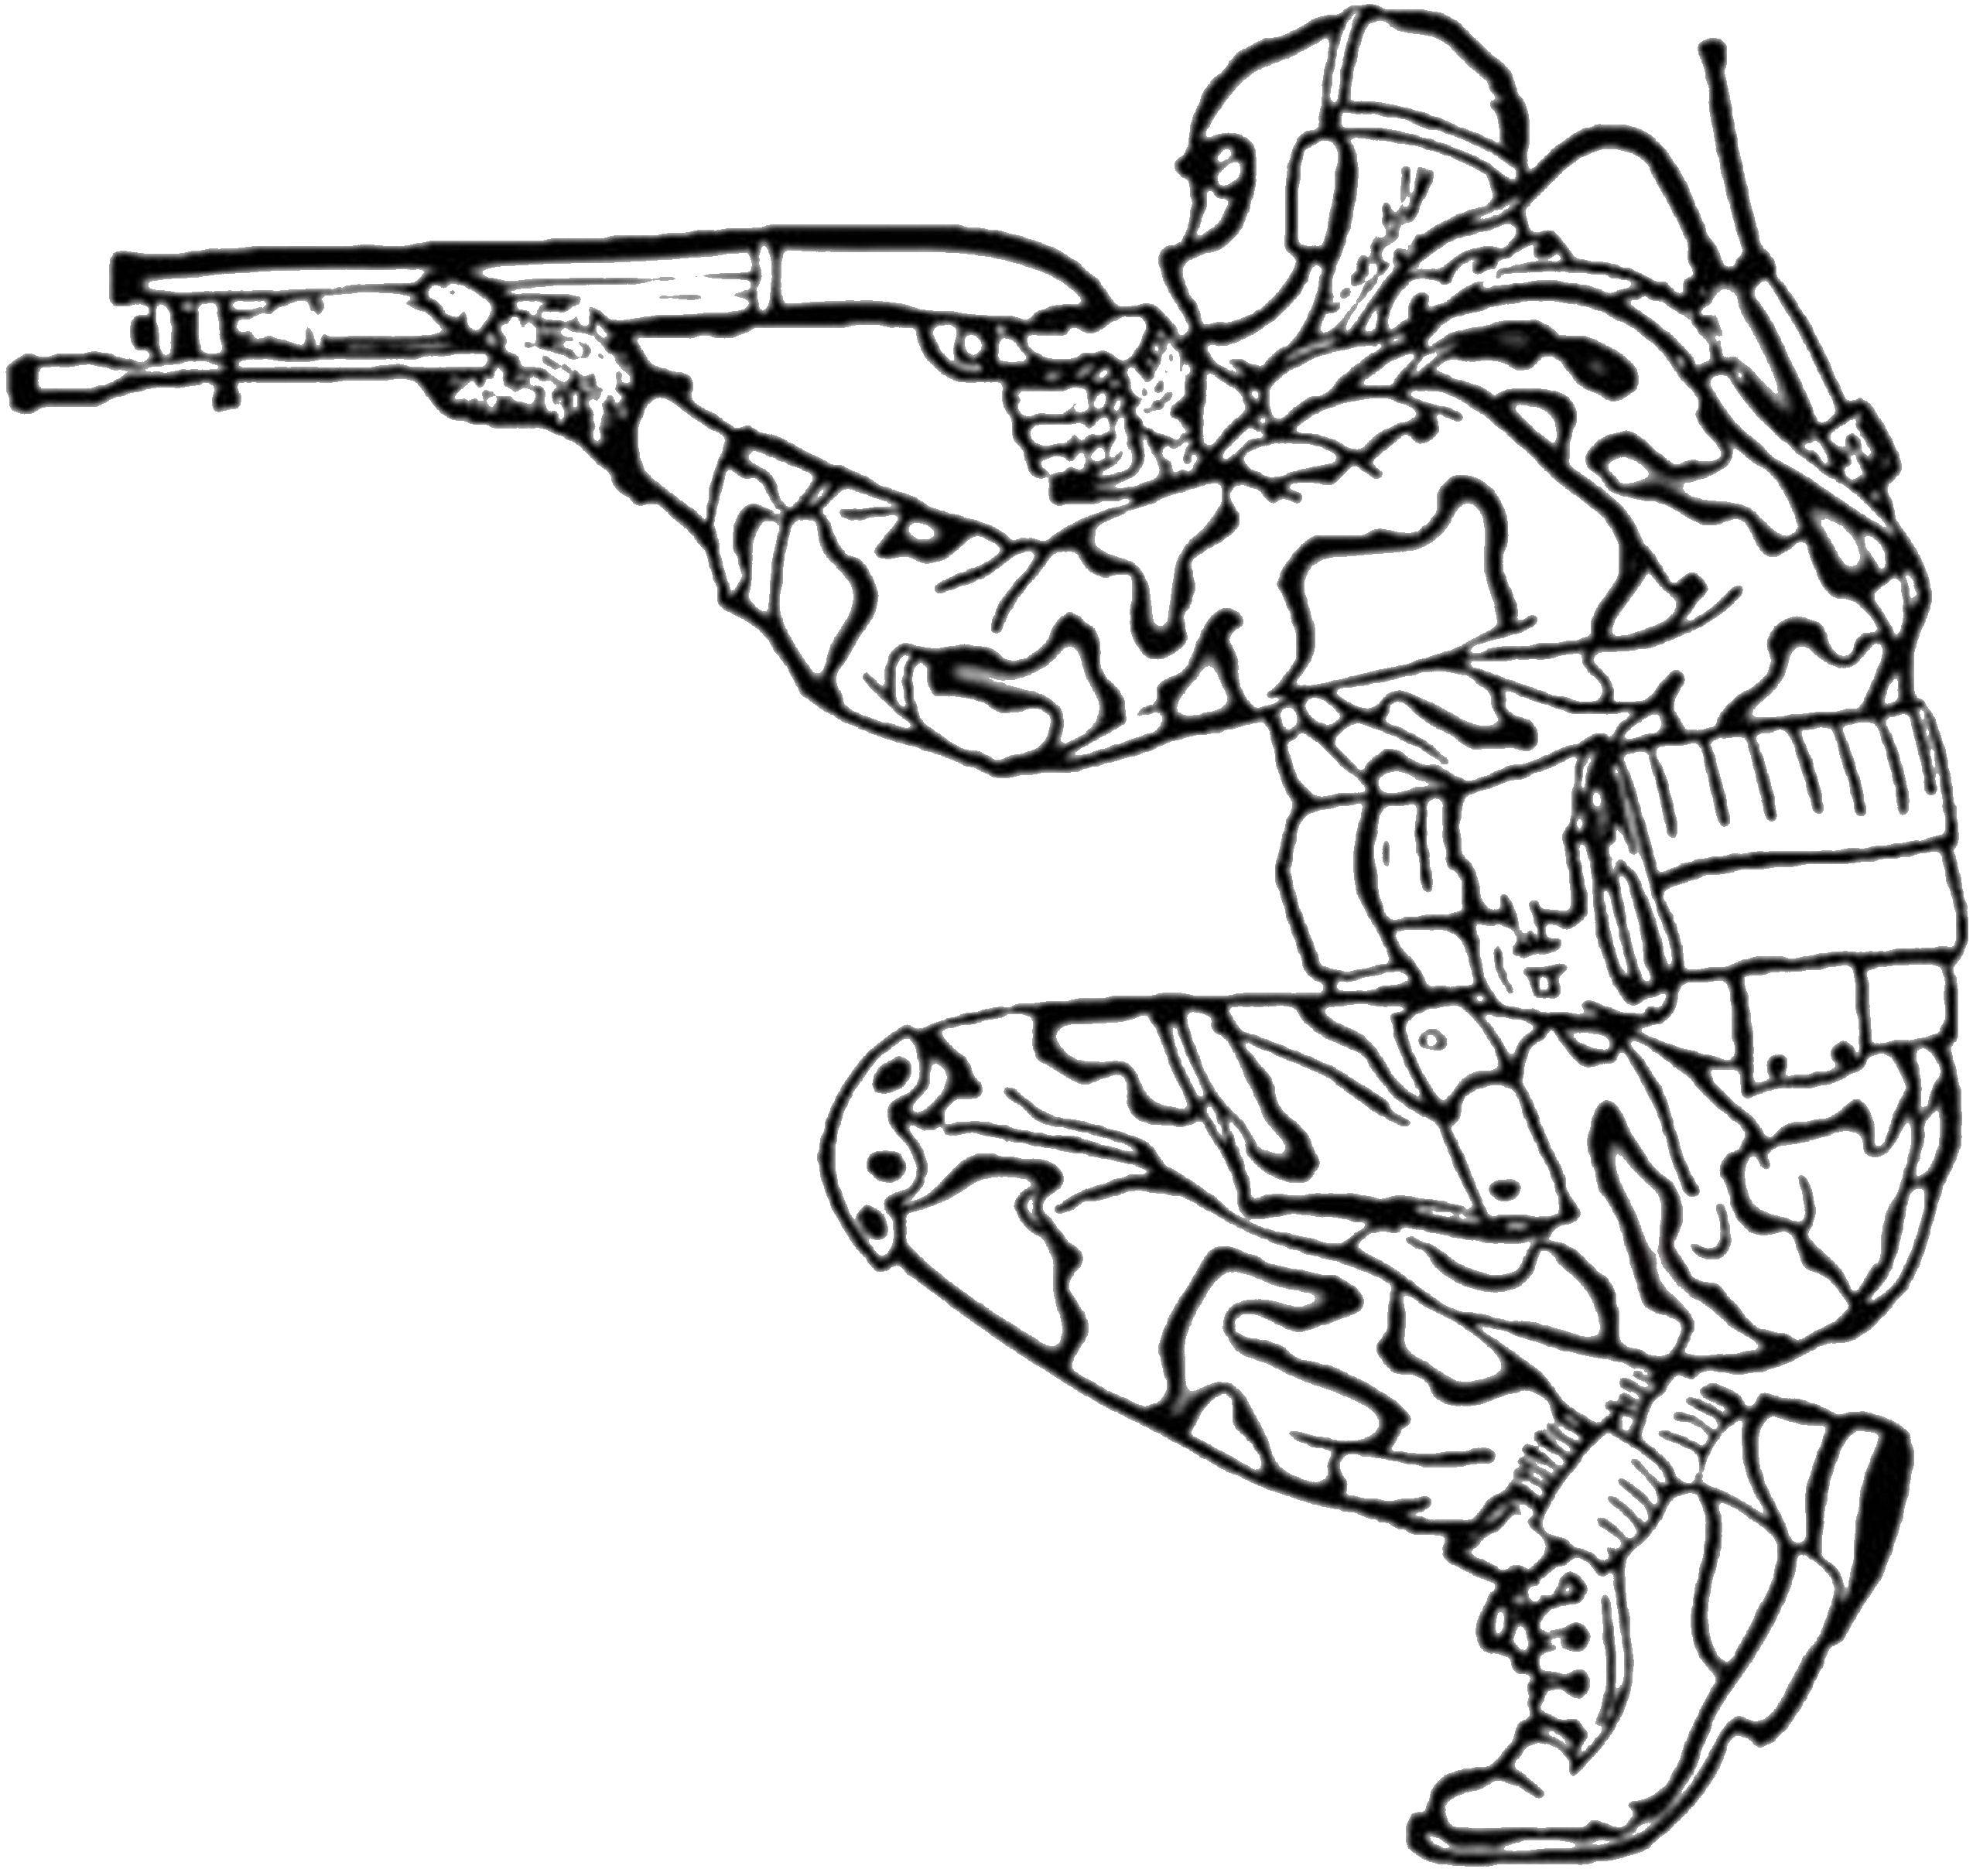 Online coloring pages Coloring page Sniper military, Download print coloring  page.